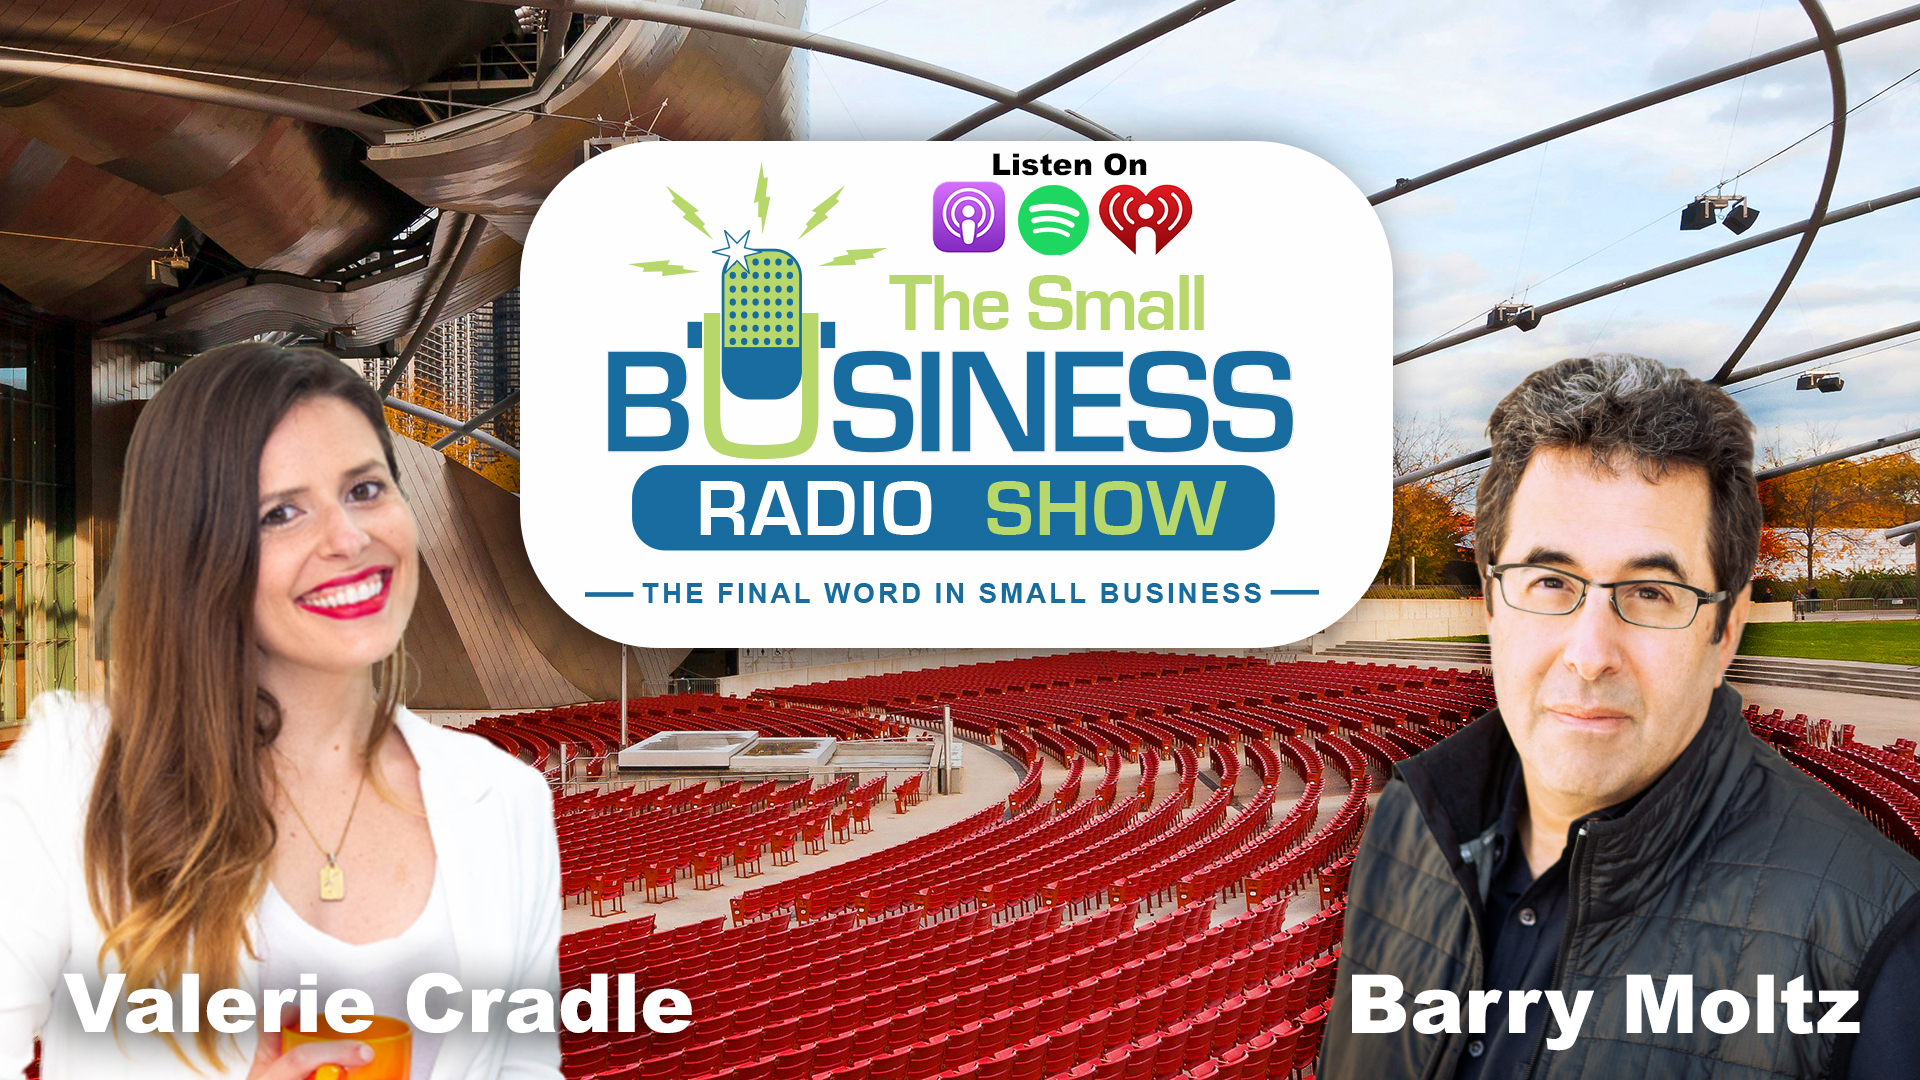 Valerie Cradle on The Small Business Radio Show